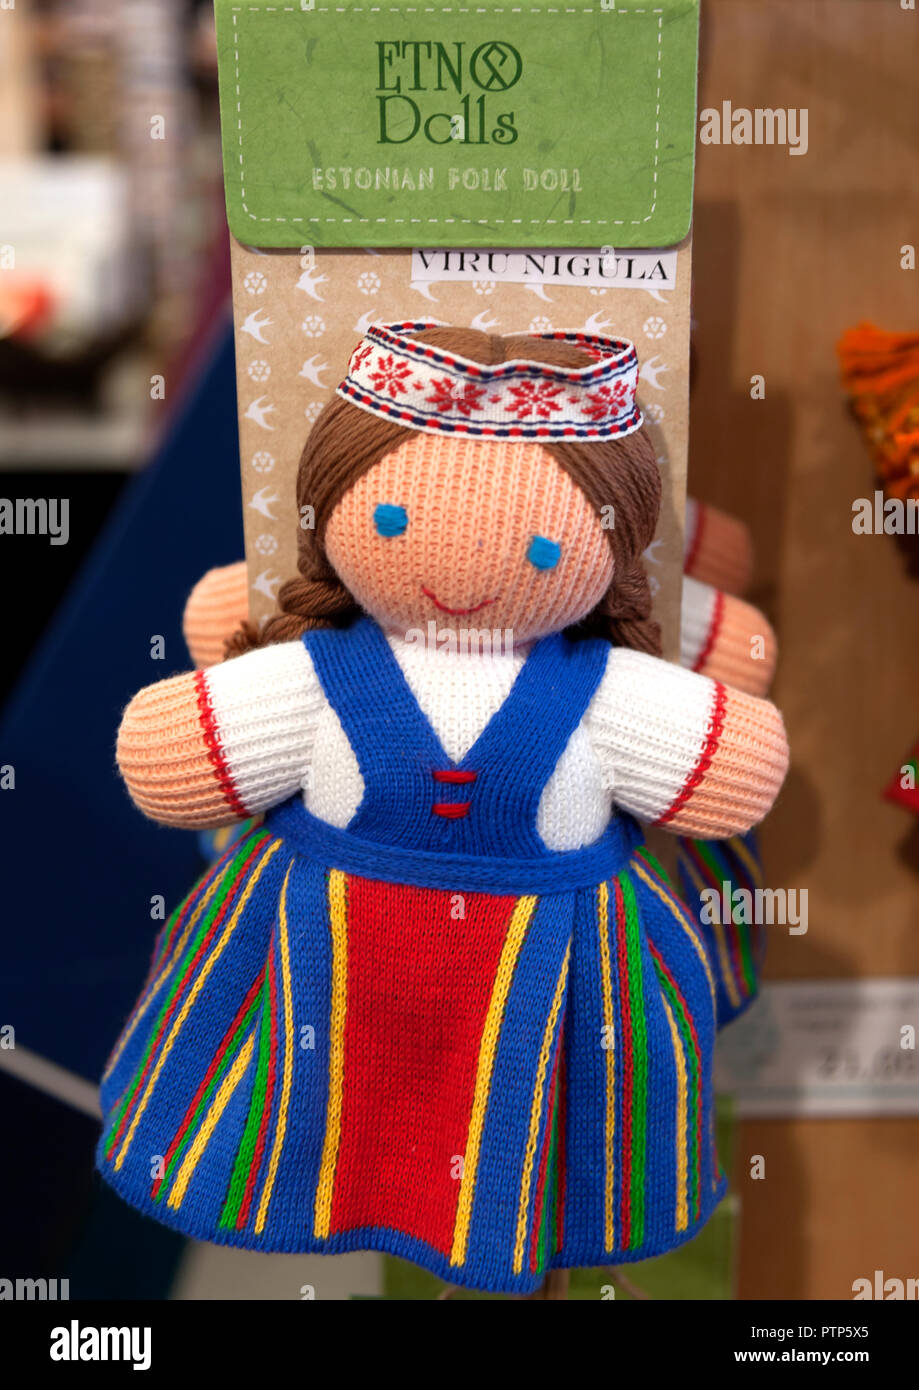 Traditional knitted dolls for sale in Tallinn shop Stock Photo